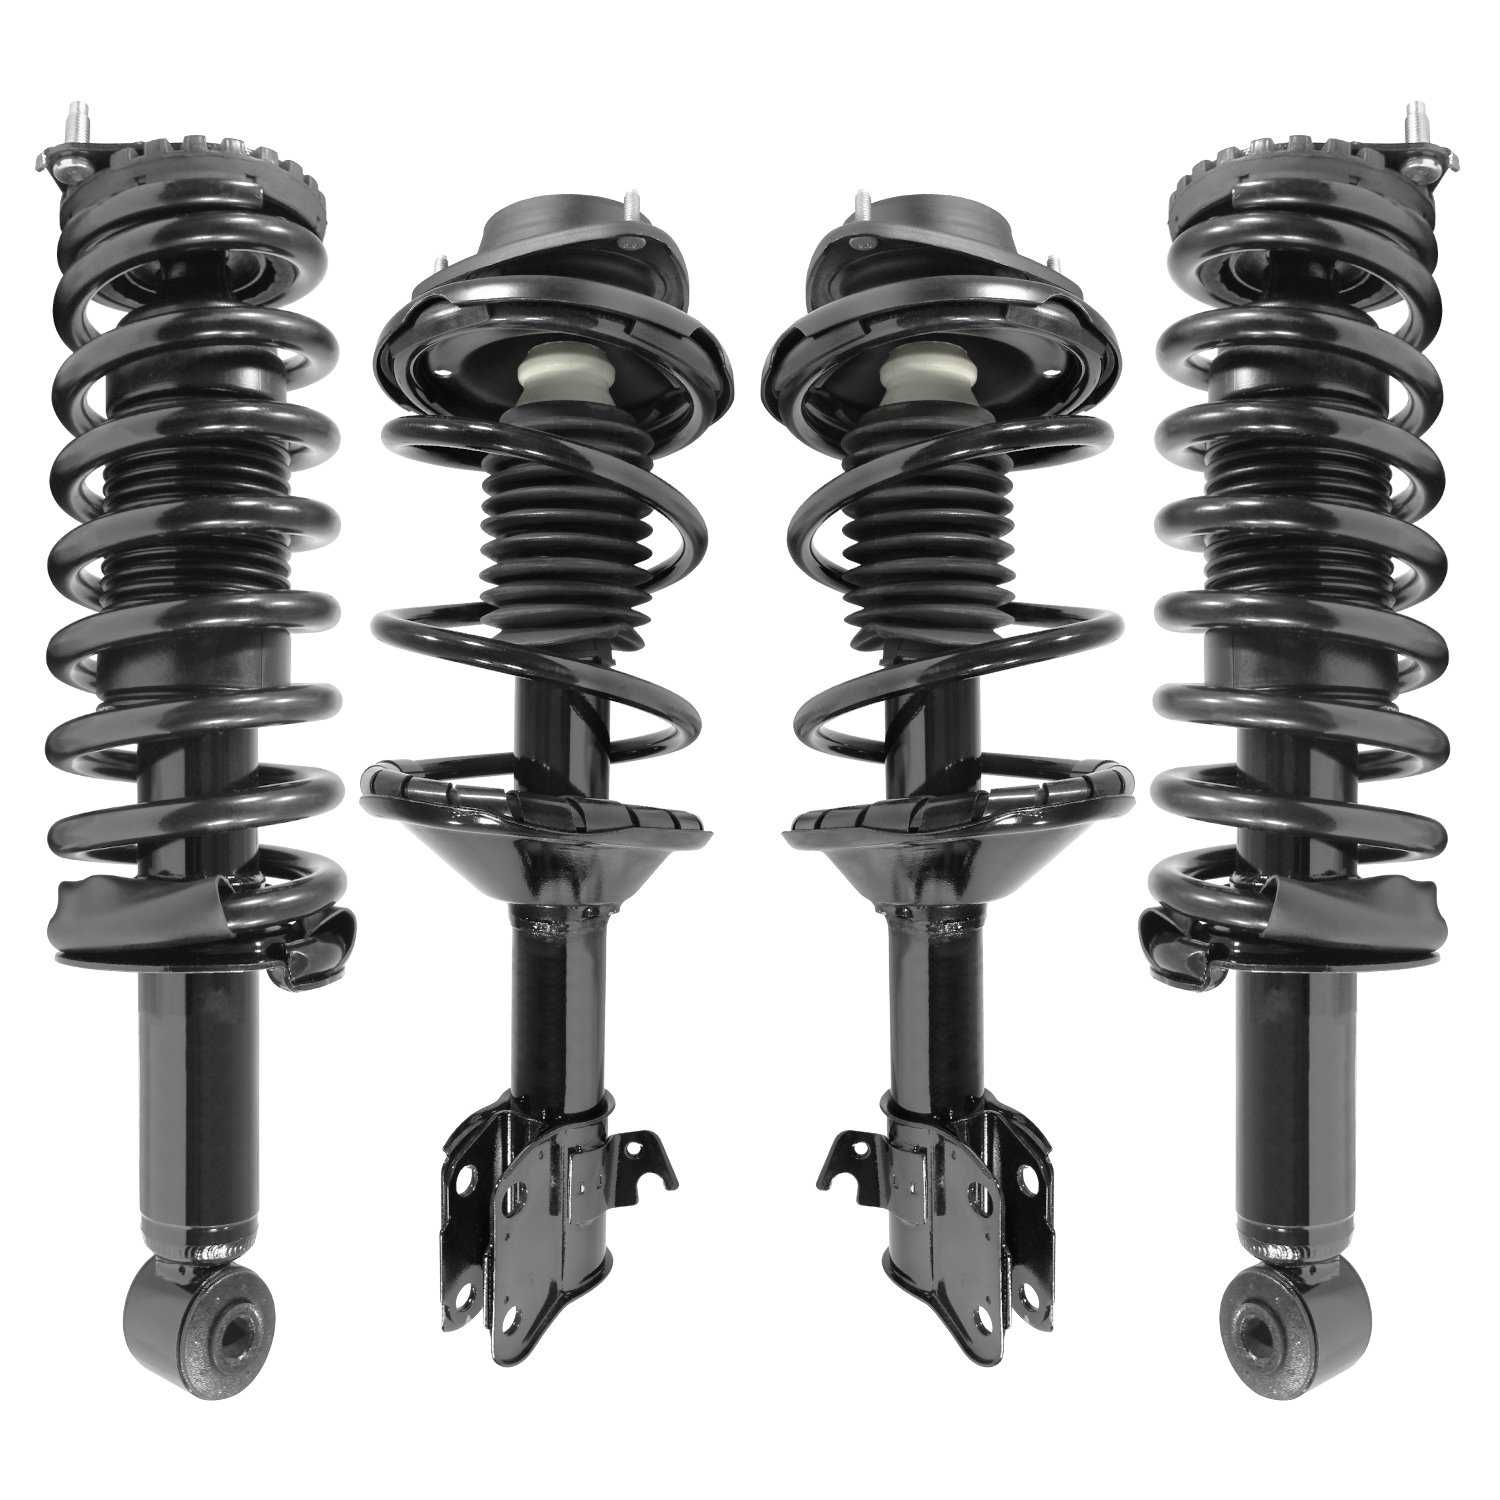 4-11893-15850-001 Front & Rear Suspension Strut & Coil Spring Assembly Kit Fits Select Subaru Legacy